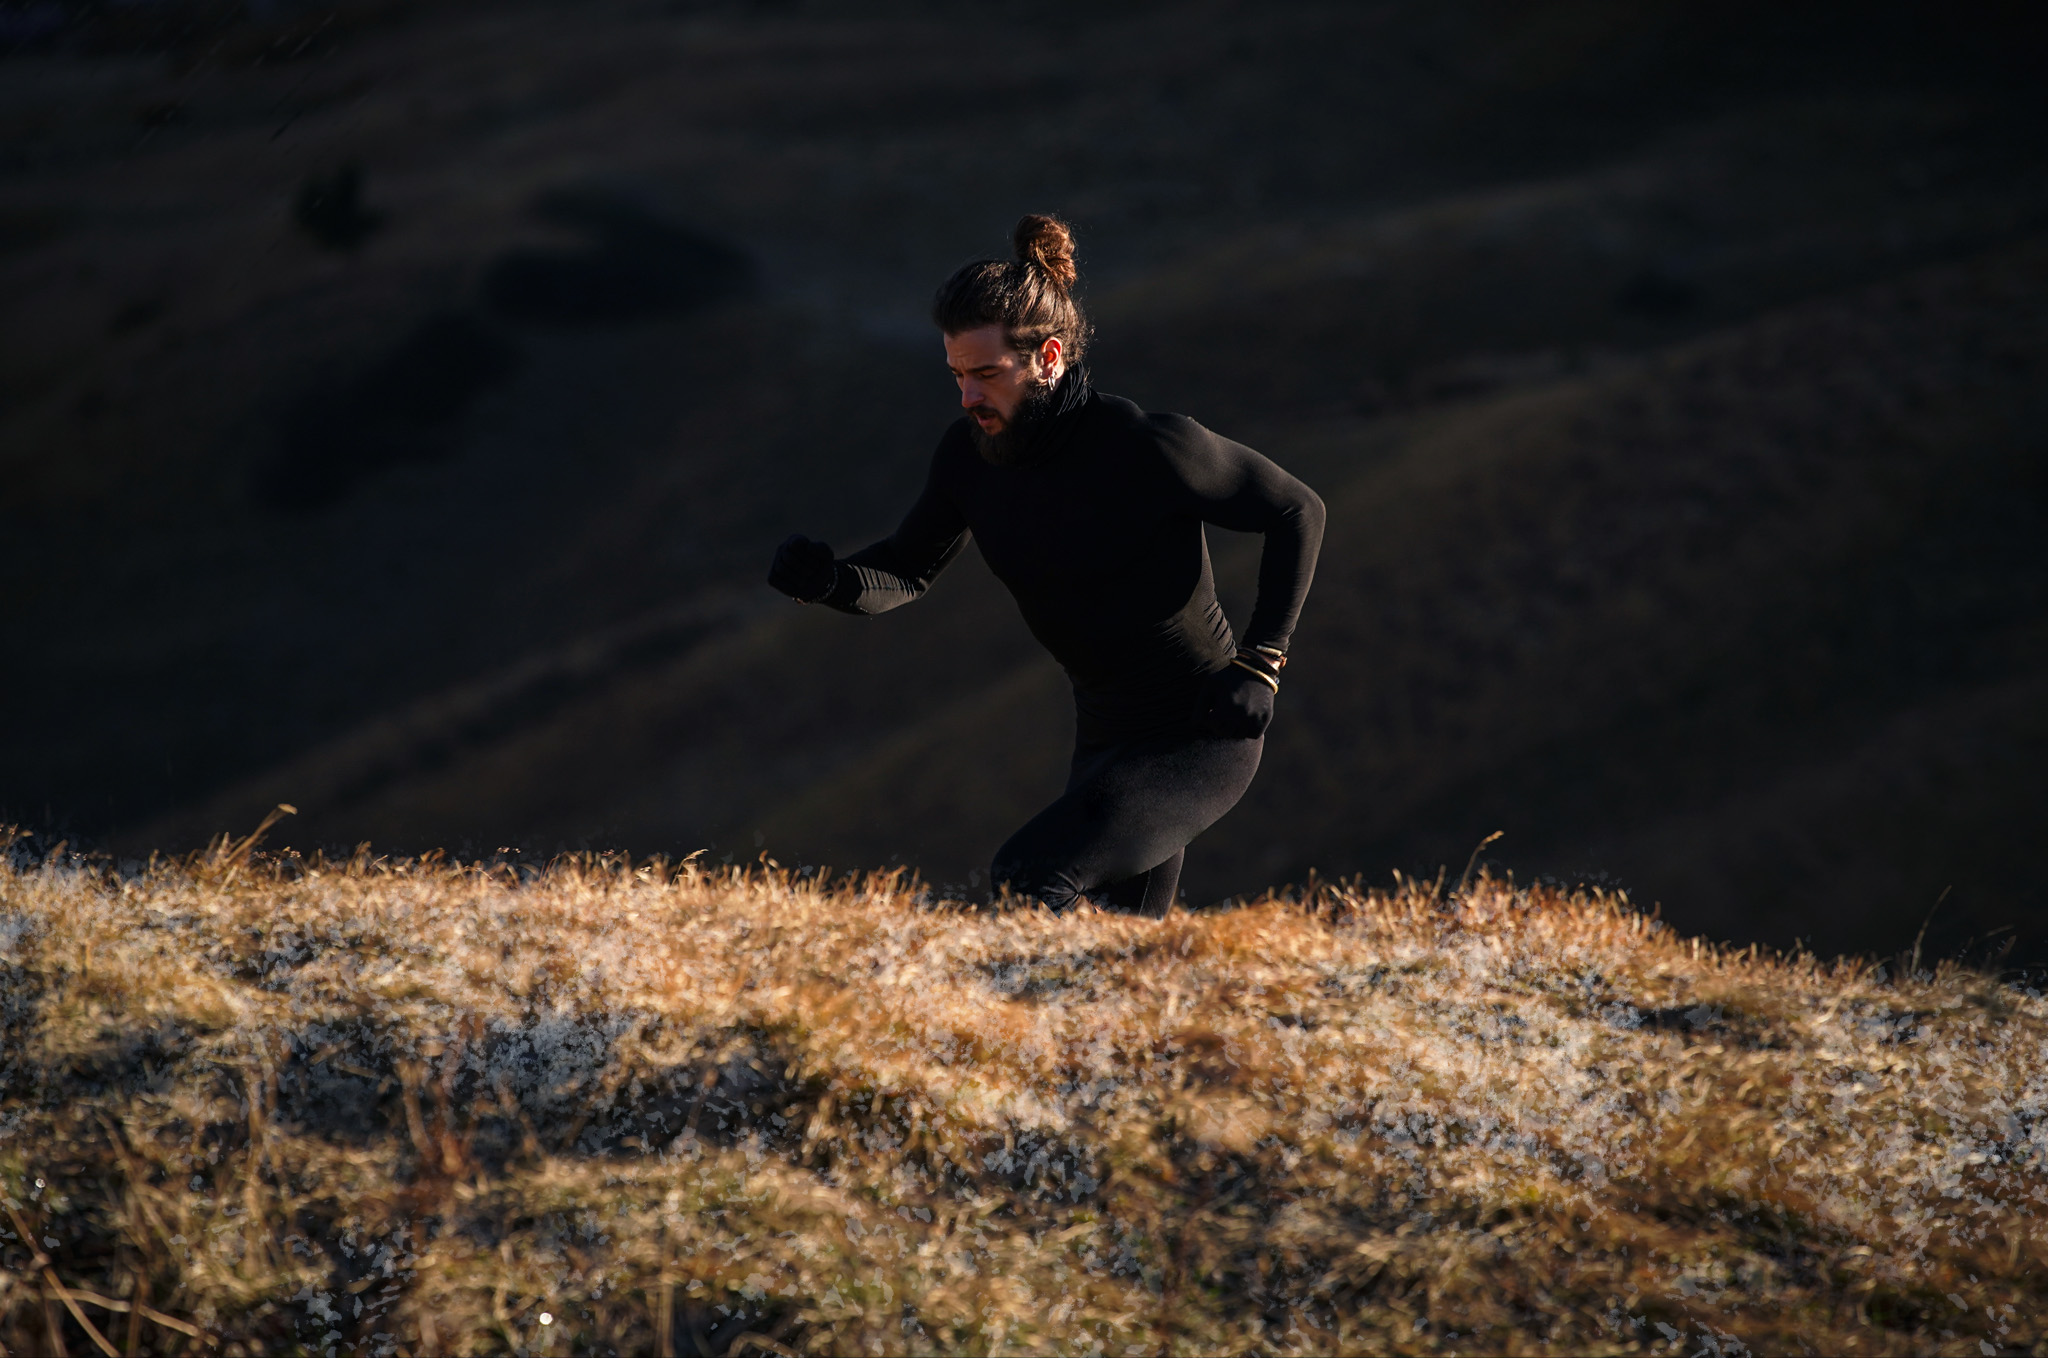 Oxyburn and Merino wool: a winning combo for the new collection